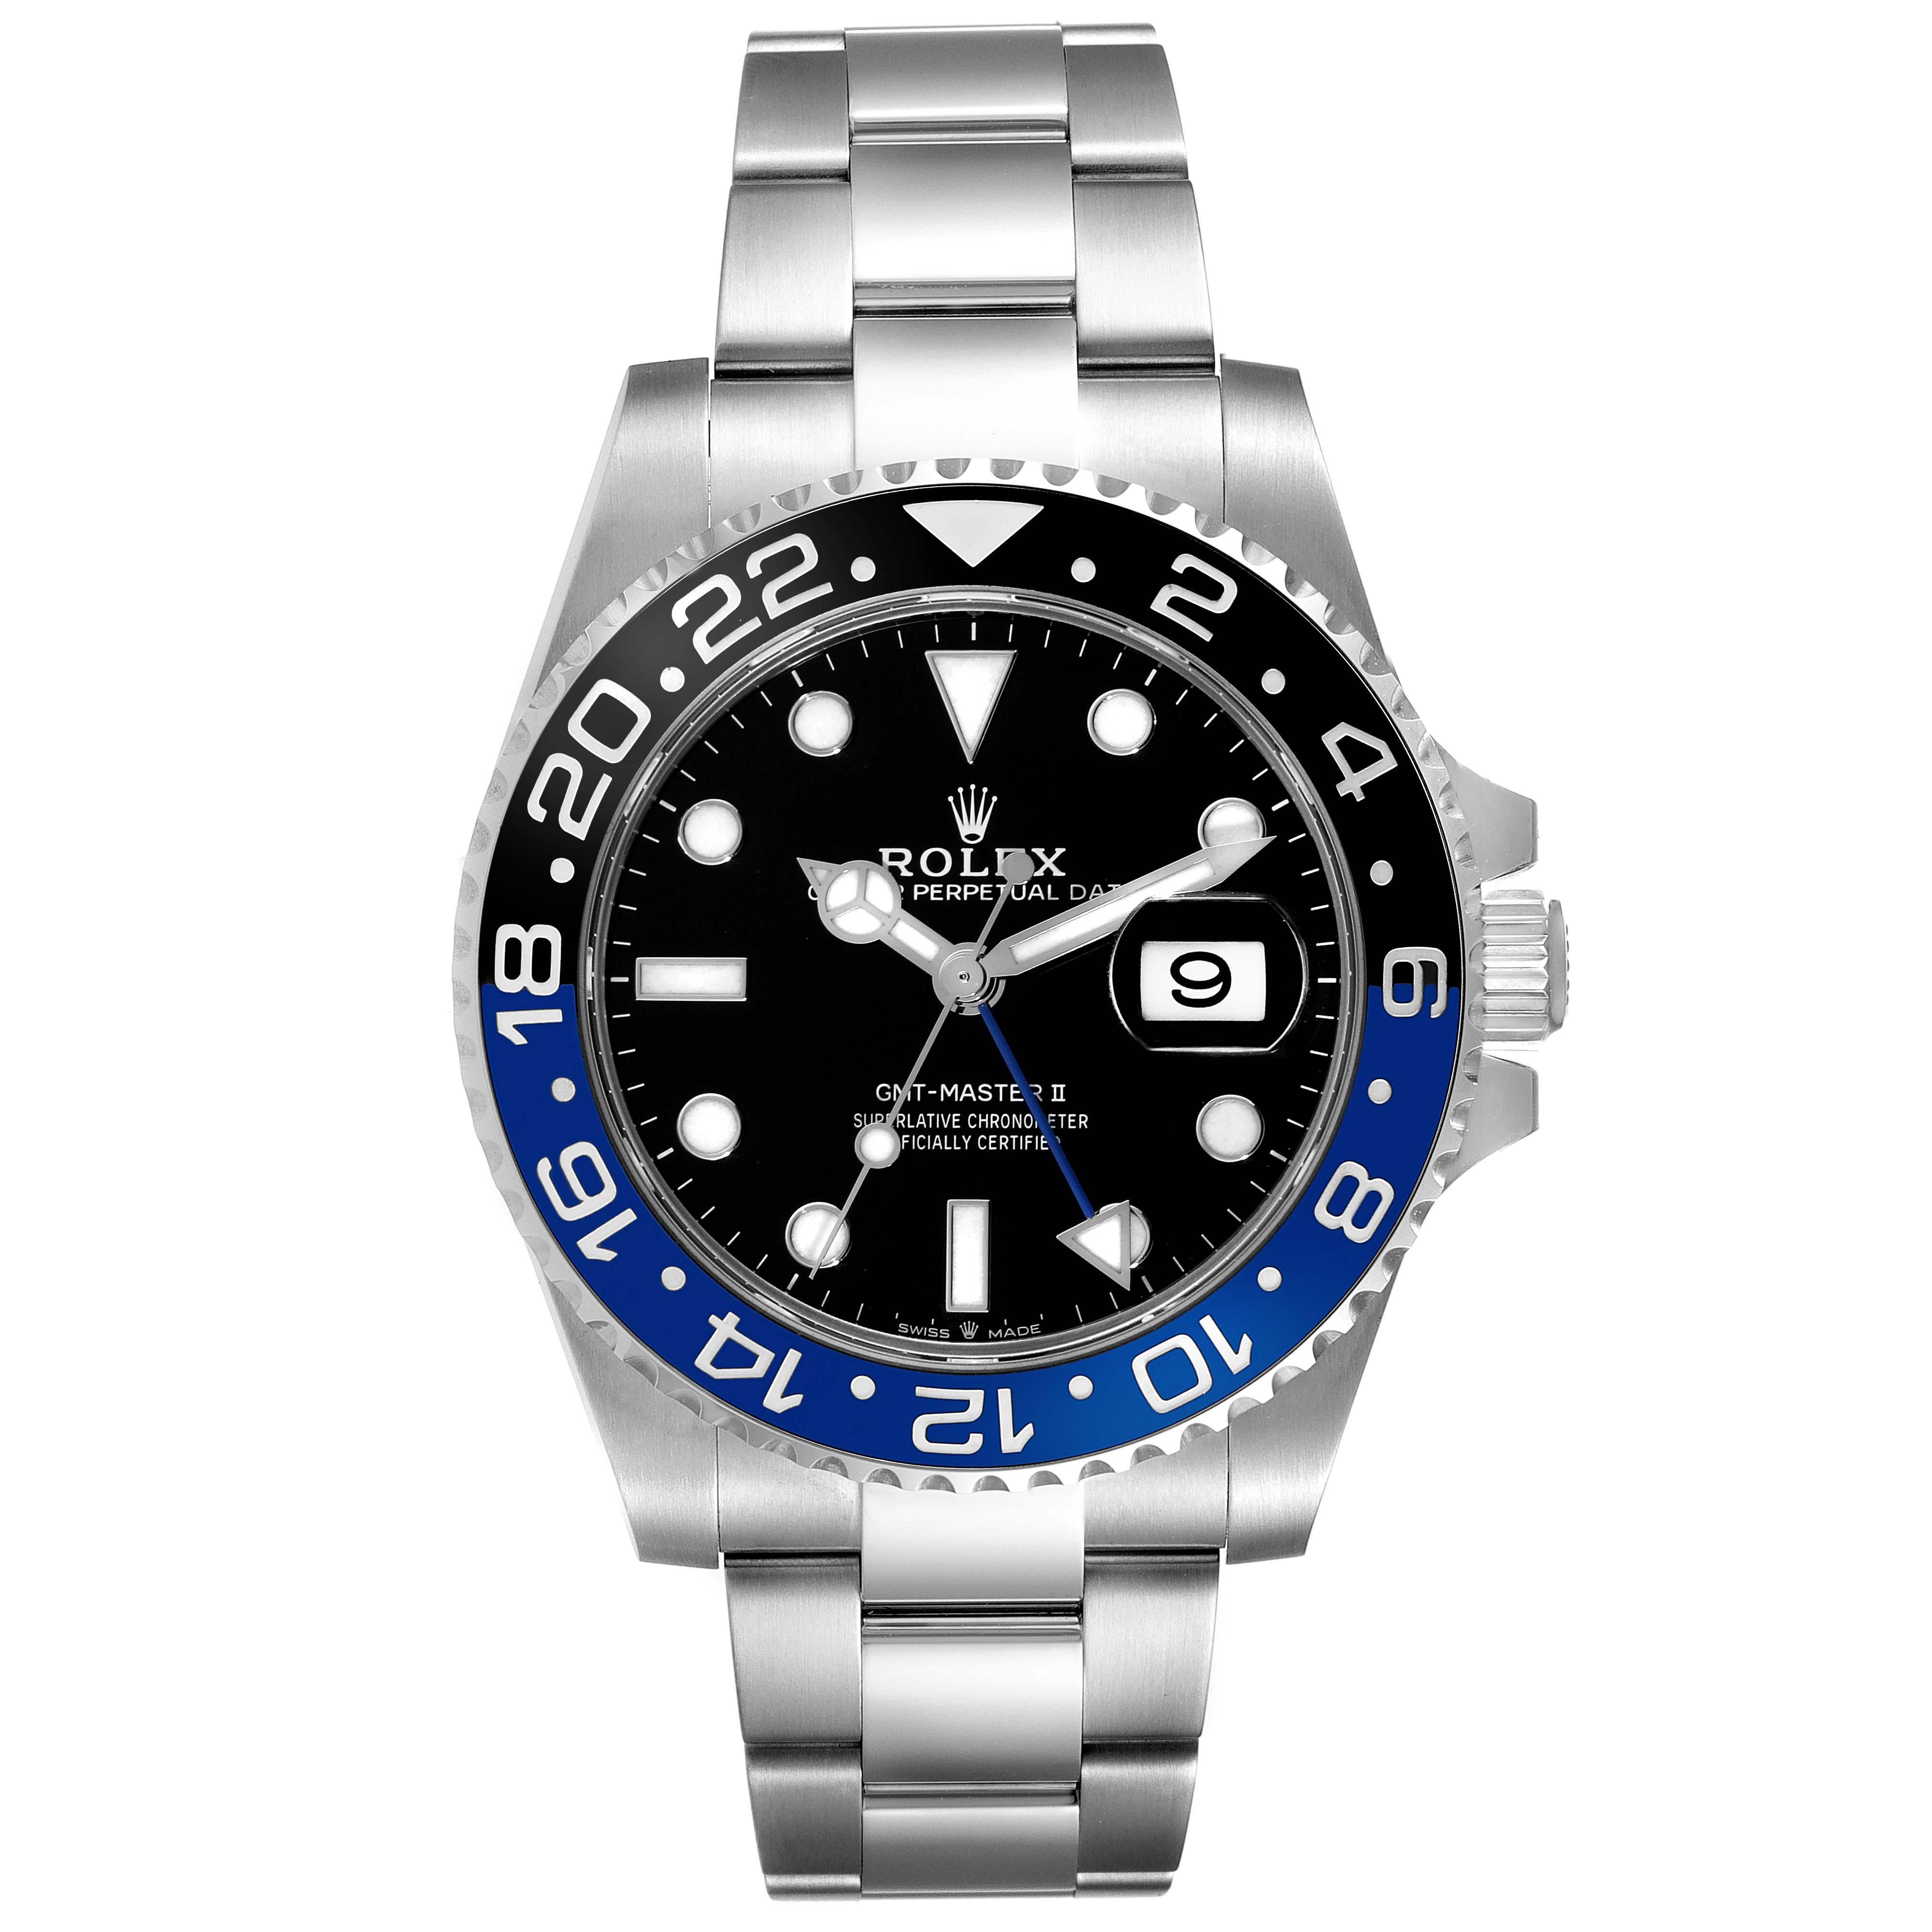 Rolex GMT Master II Black Blue Batman Bezel Steel Mens Watch 126710 Box Card. Officially certified chronometer automatic self-winding movement. Stainless steel case 40 mm in diameter. Rolex logo on the crown. Stainless steel bi-directional rotating